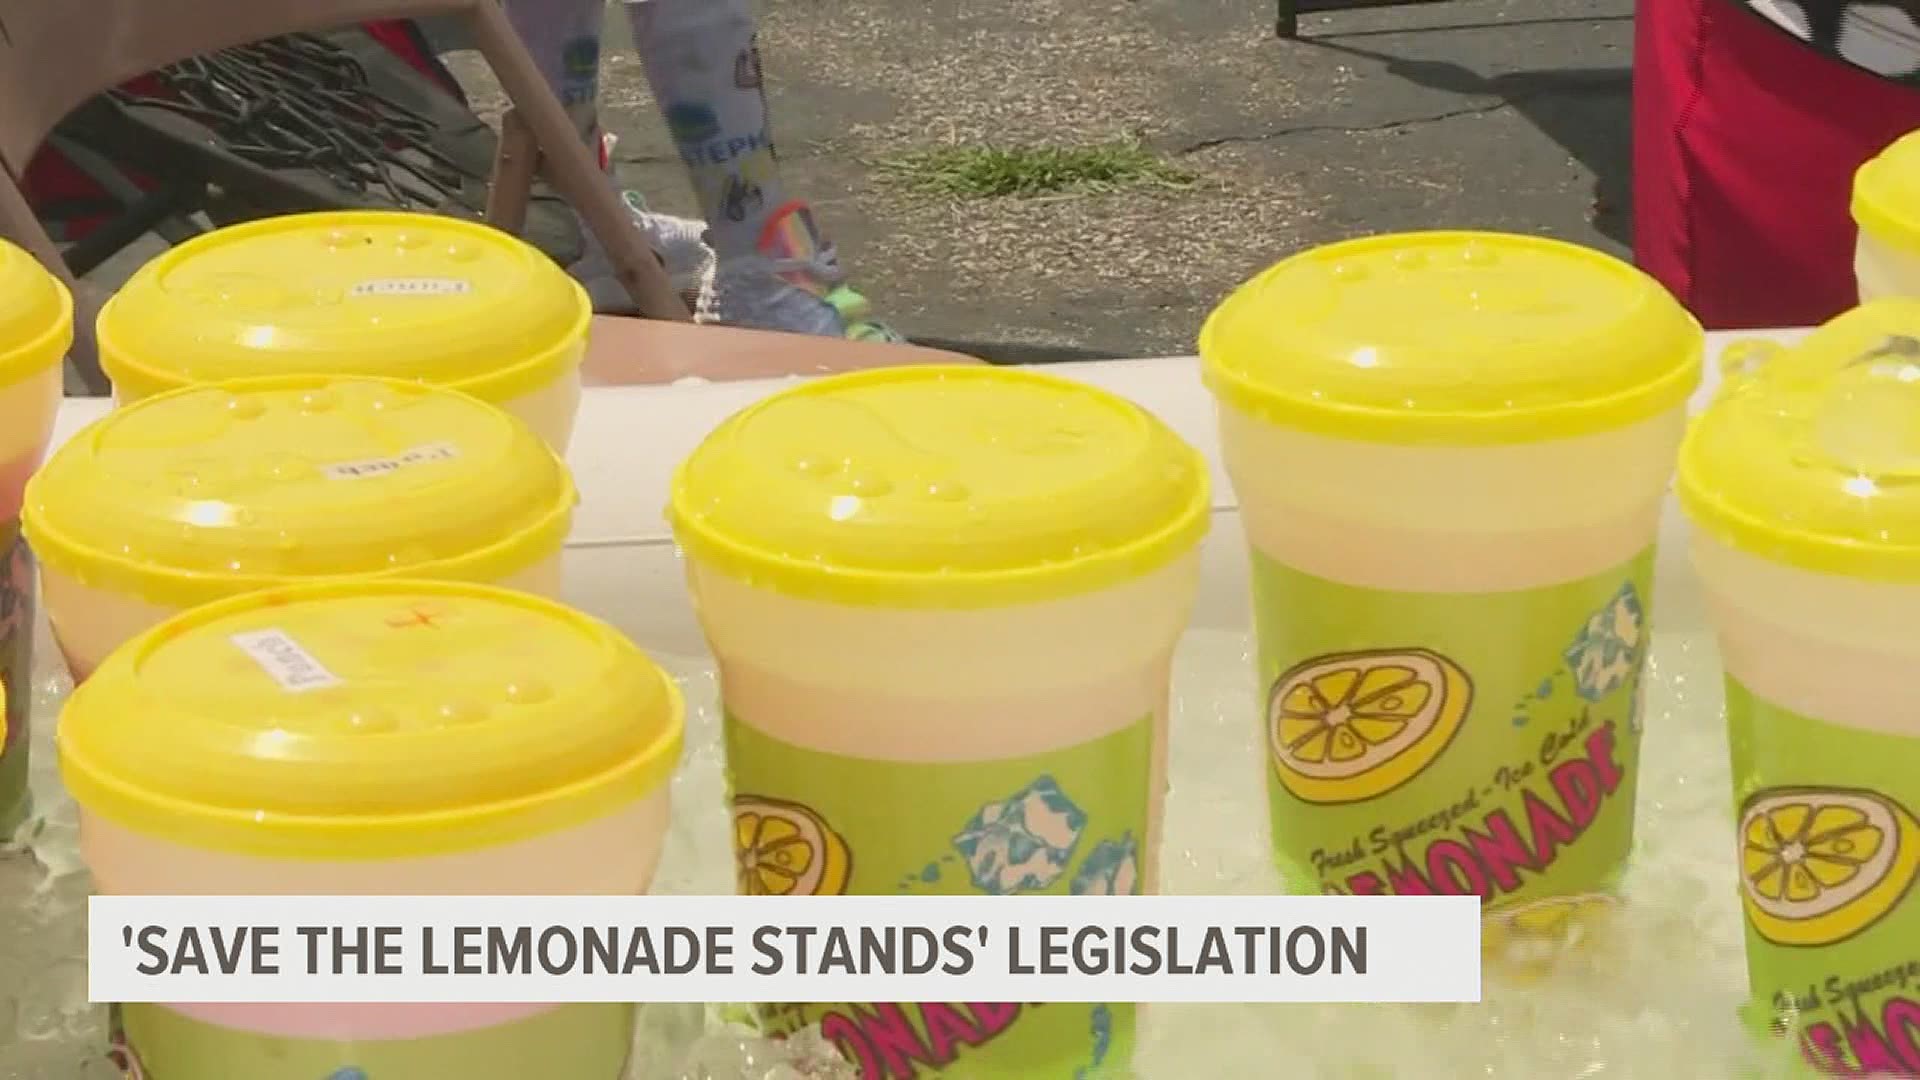 The legislation would exempt some child-run businesses from municipal regulation and licensing.